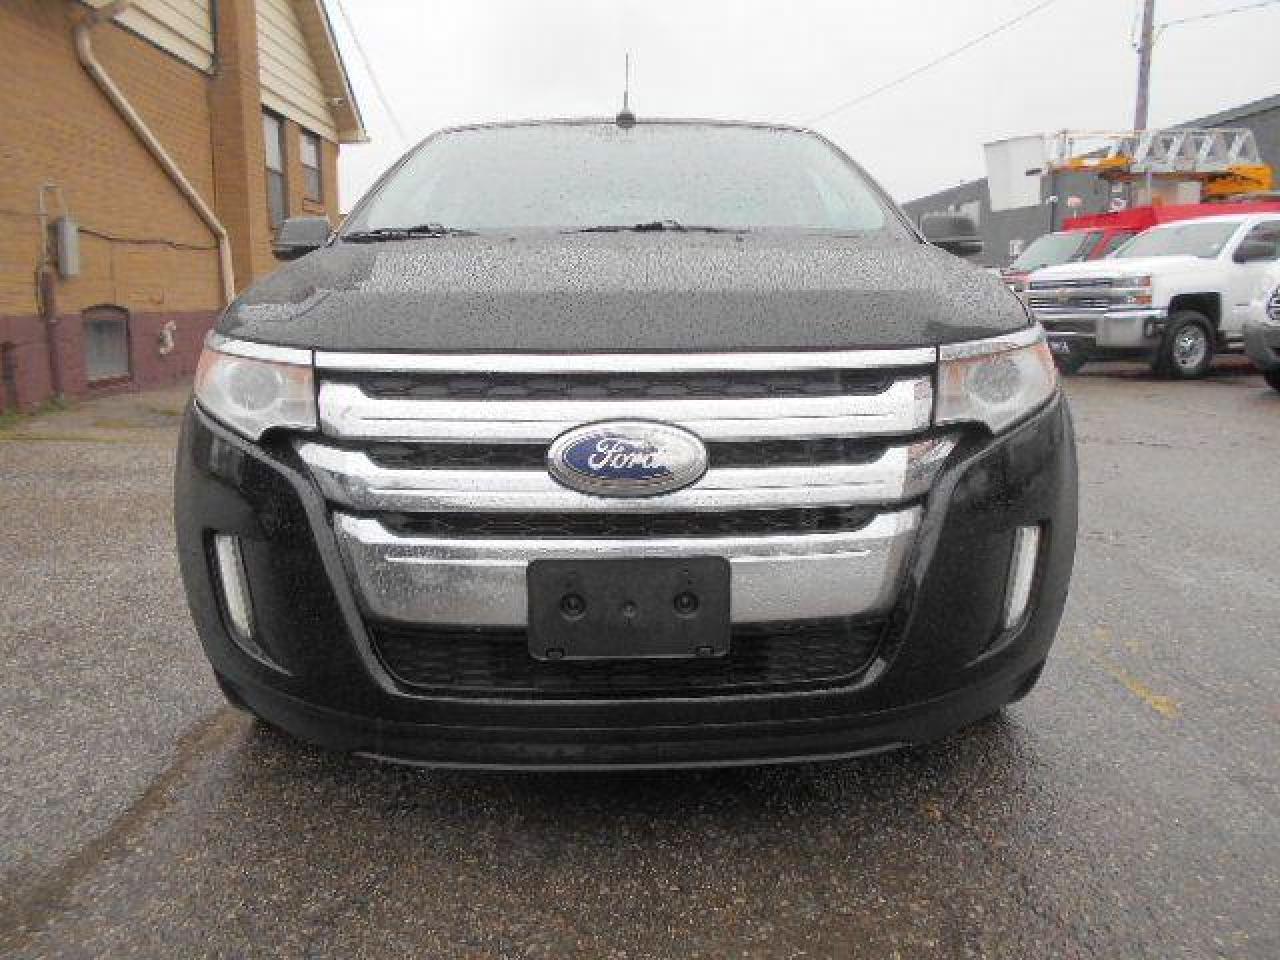 2013 Ford Edge LIMITED 3.5L V6 Loaded Leather Panoramic Roof GPS - Photo #2